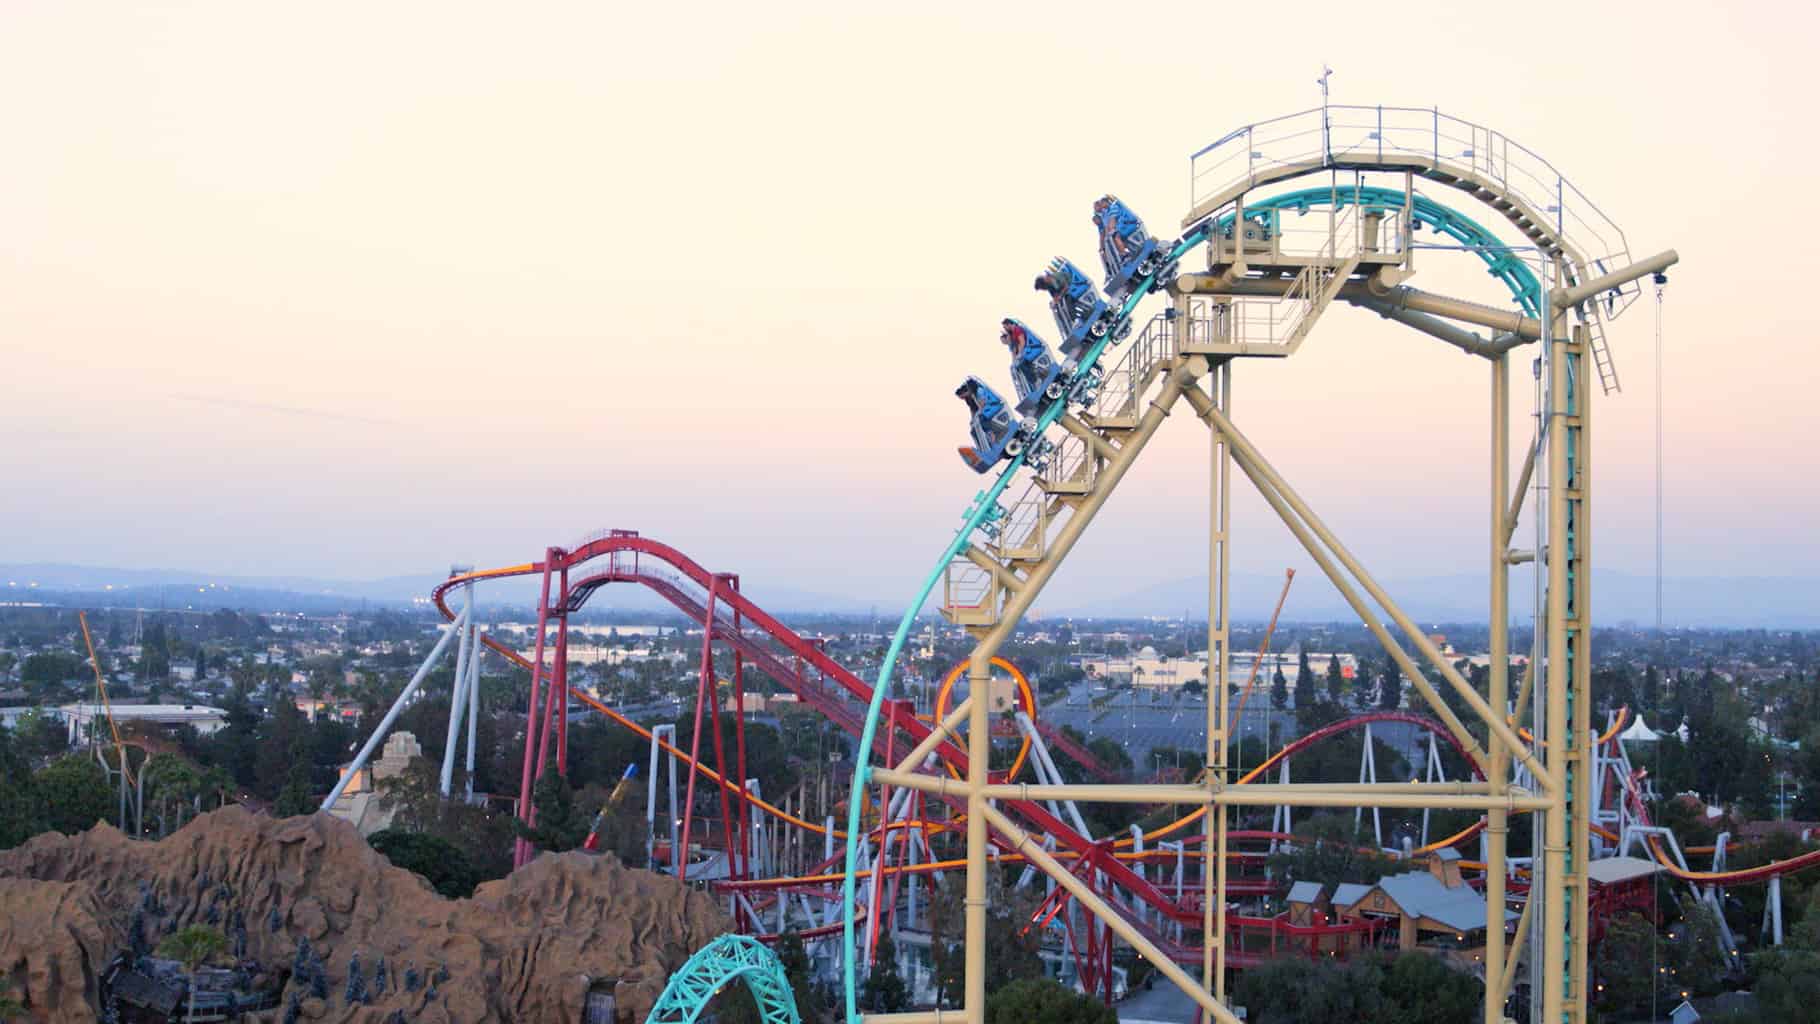 Experience HangTime at Knott's Berry Farm, the first and only dive coaster in California.  The brand new coaster towers 150 feet above ground, showcasing gravity defying inversions, mid-air suspensions and a beyond vertical drop - the steepest in California.